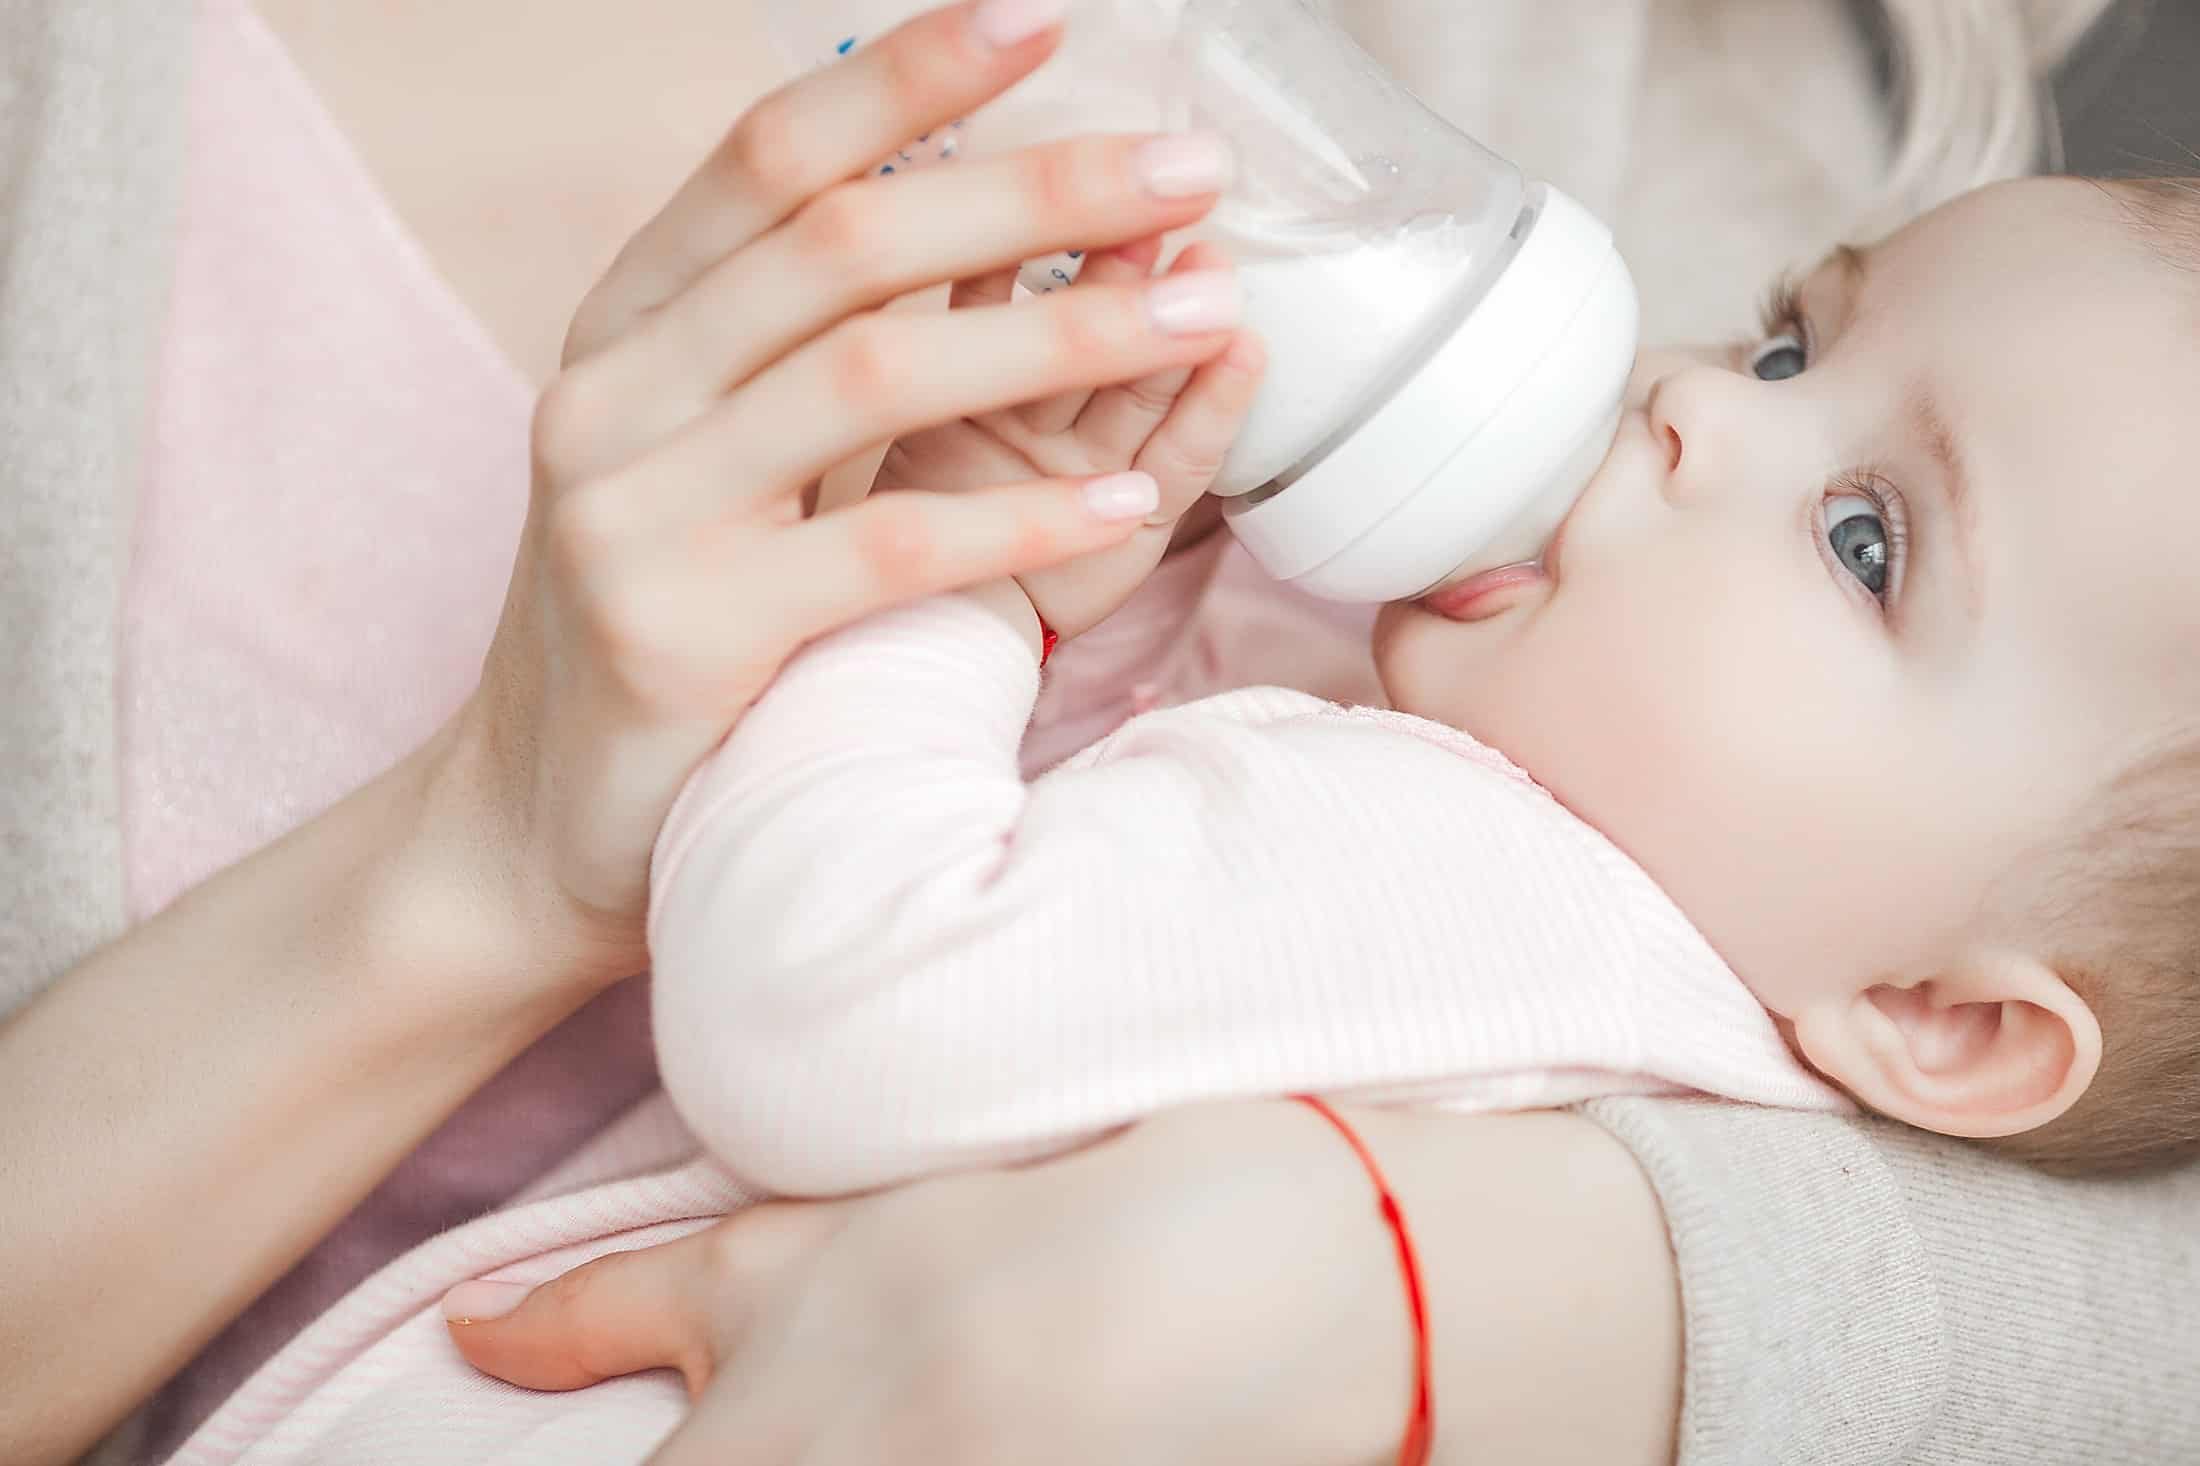 How long can breast milk be kept in the freezer?